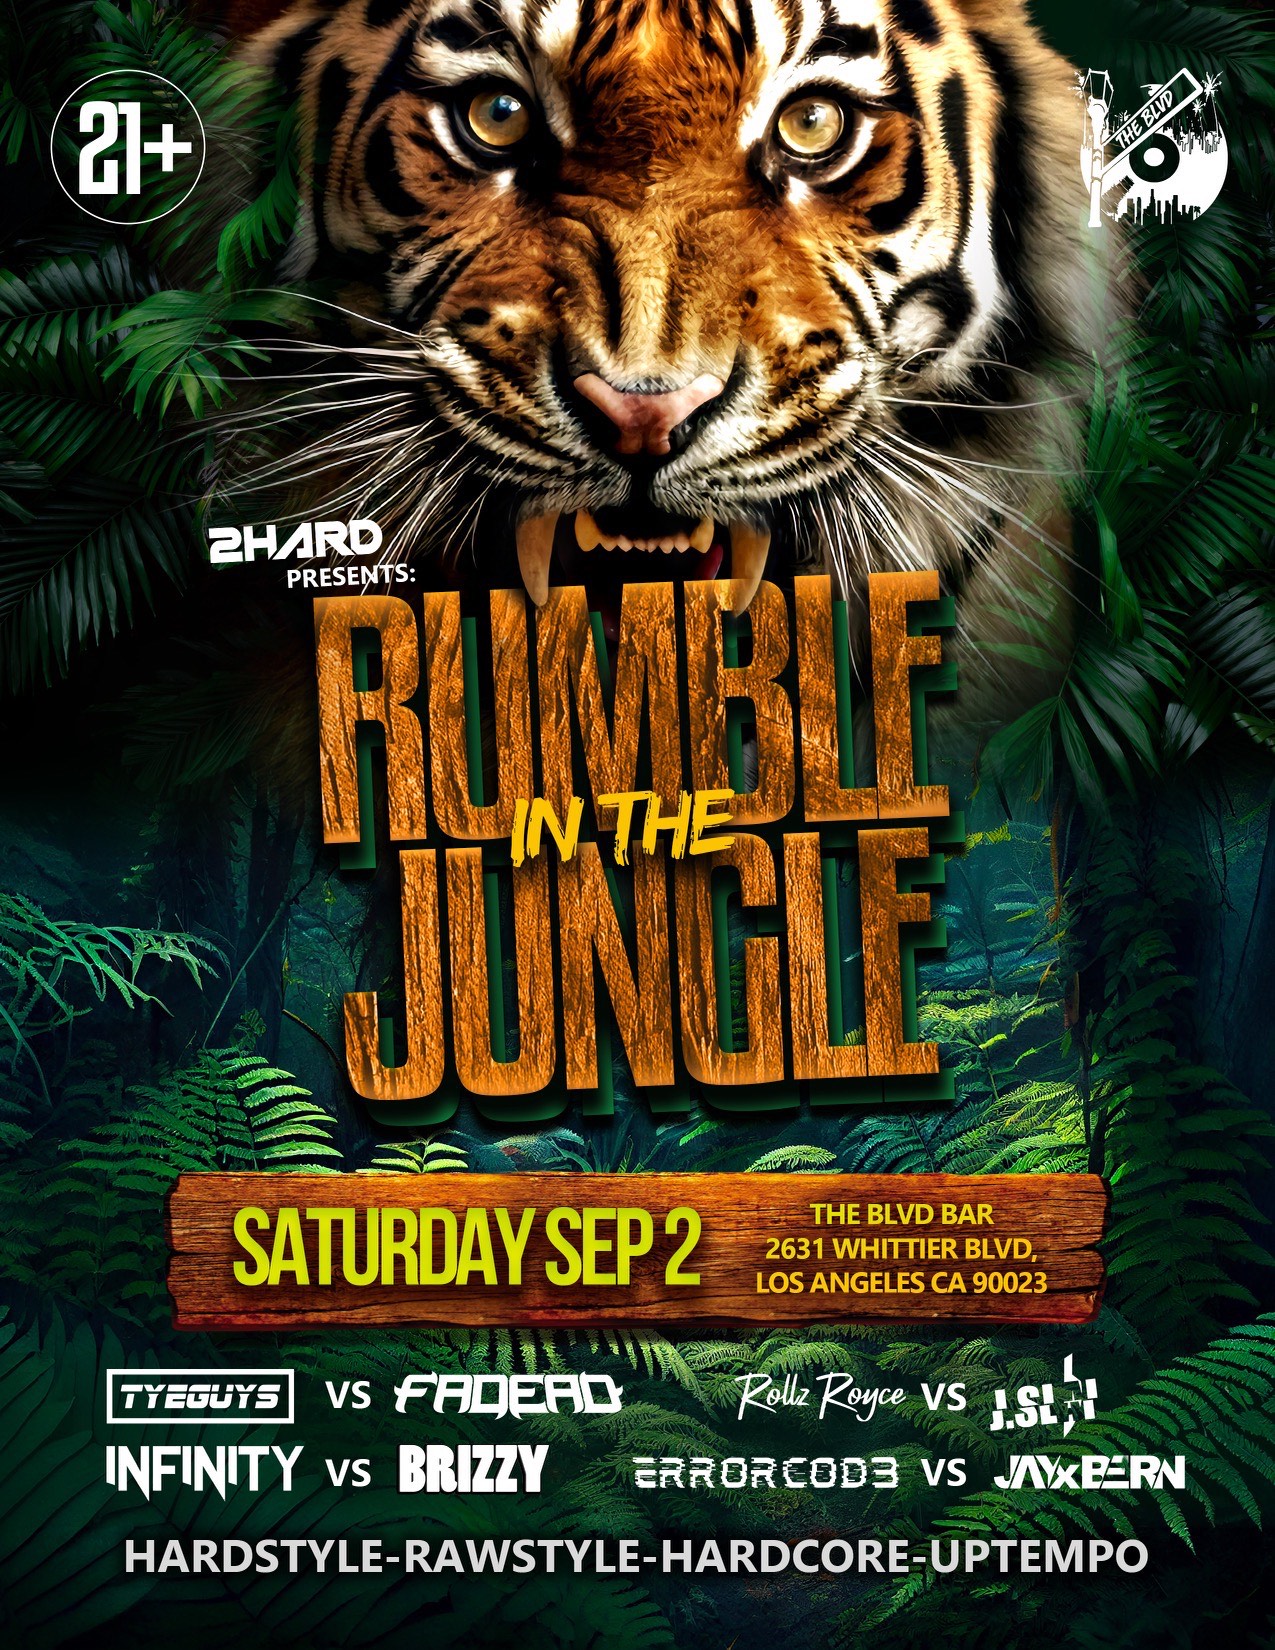 2HARD Rumble In The Jungle Lineup Flyer